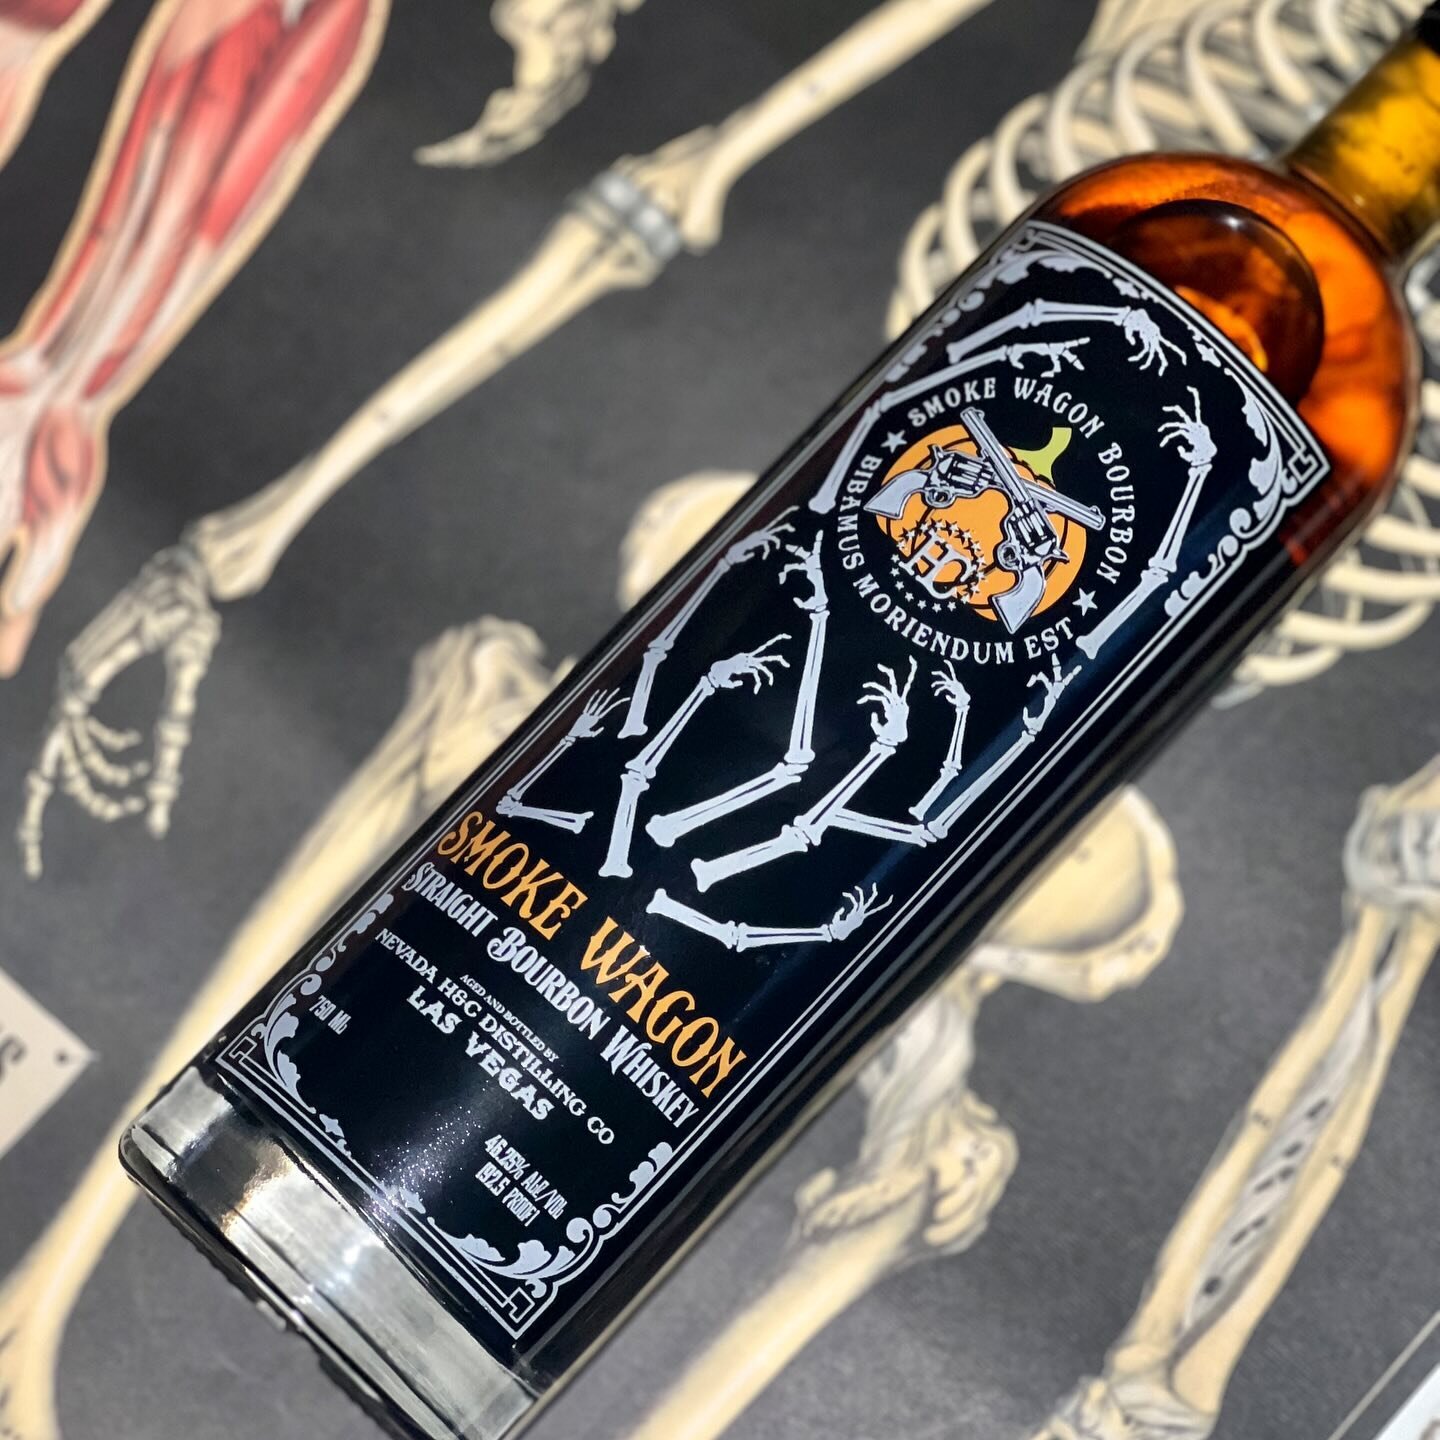 For a bone shakin&rsquo; good time 💀 Smoke Wagon Straight Bourbon Whiskey Halloween Edition. 

The bottle glows in the dark and the bottle&rsquo;s contents? Spicy notes, hints of caramel &amp; fruit with a smooth finish. 

&mdash;
#halloween #spirit